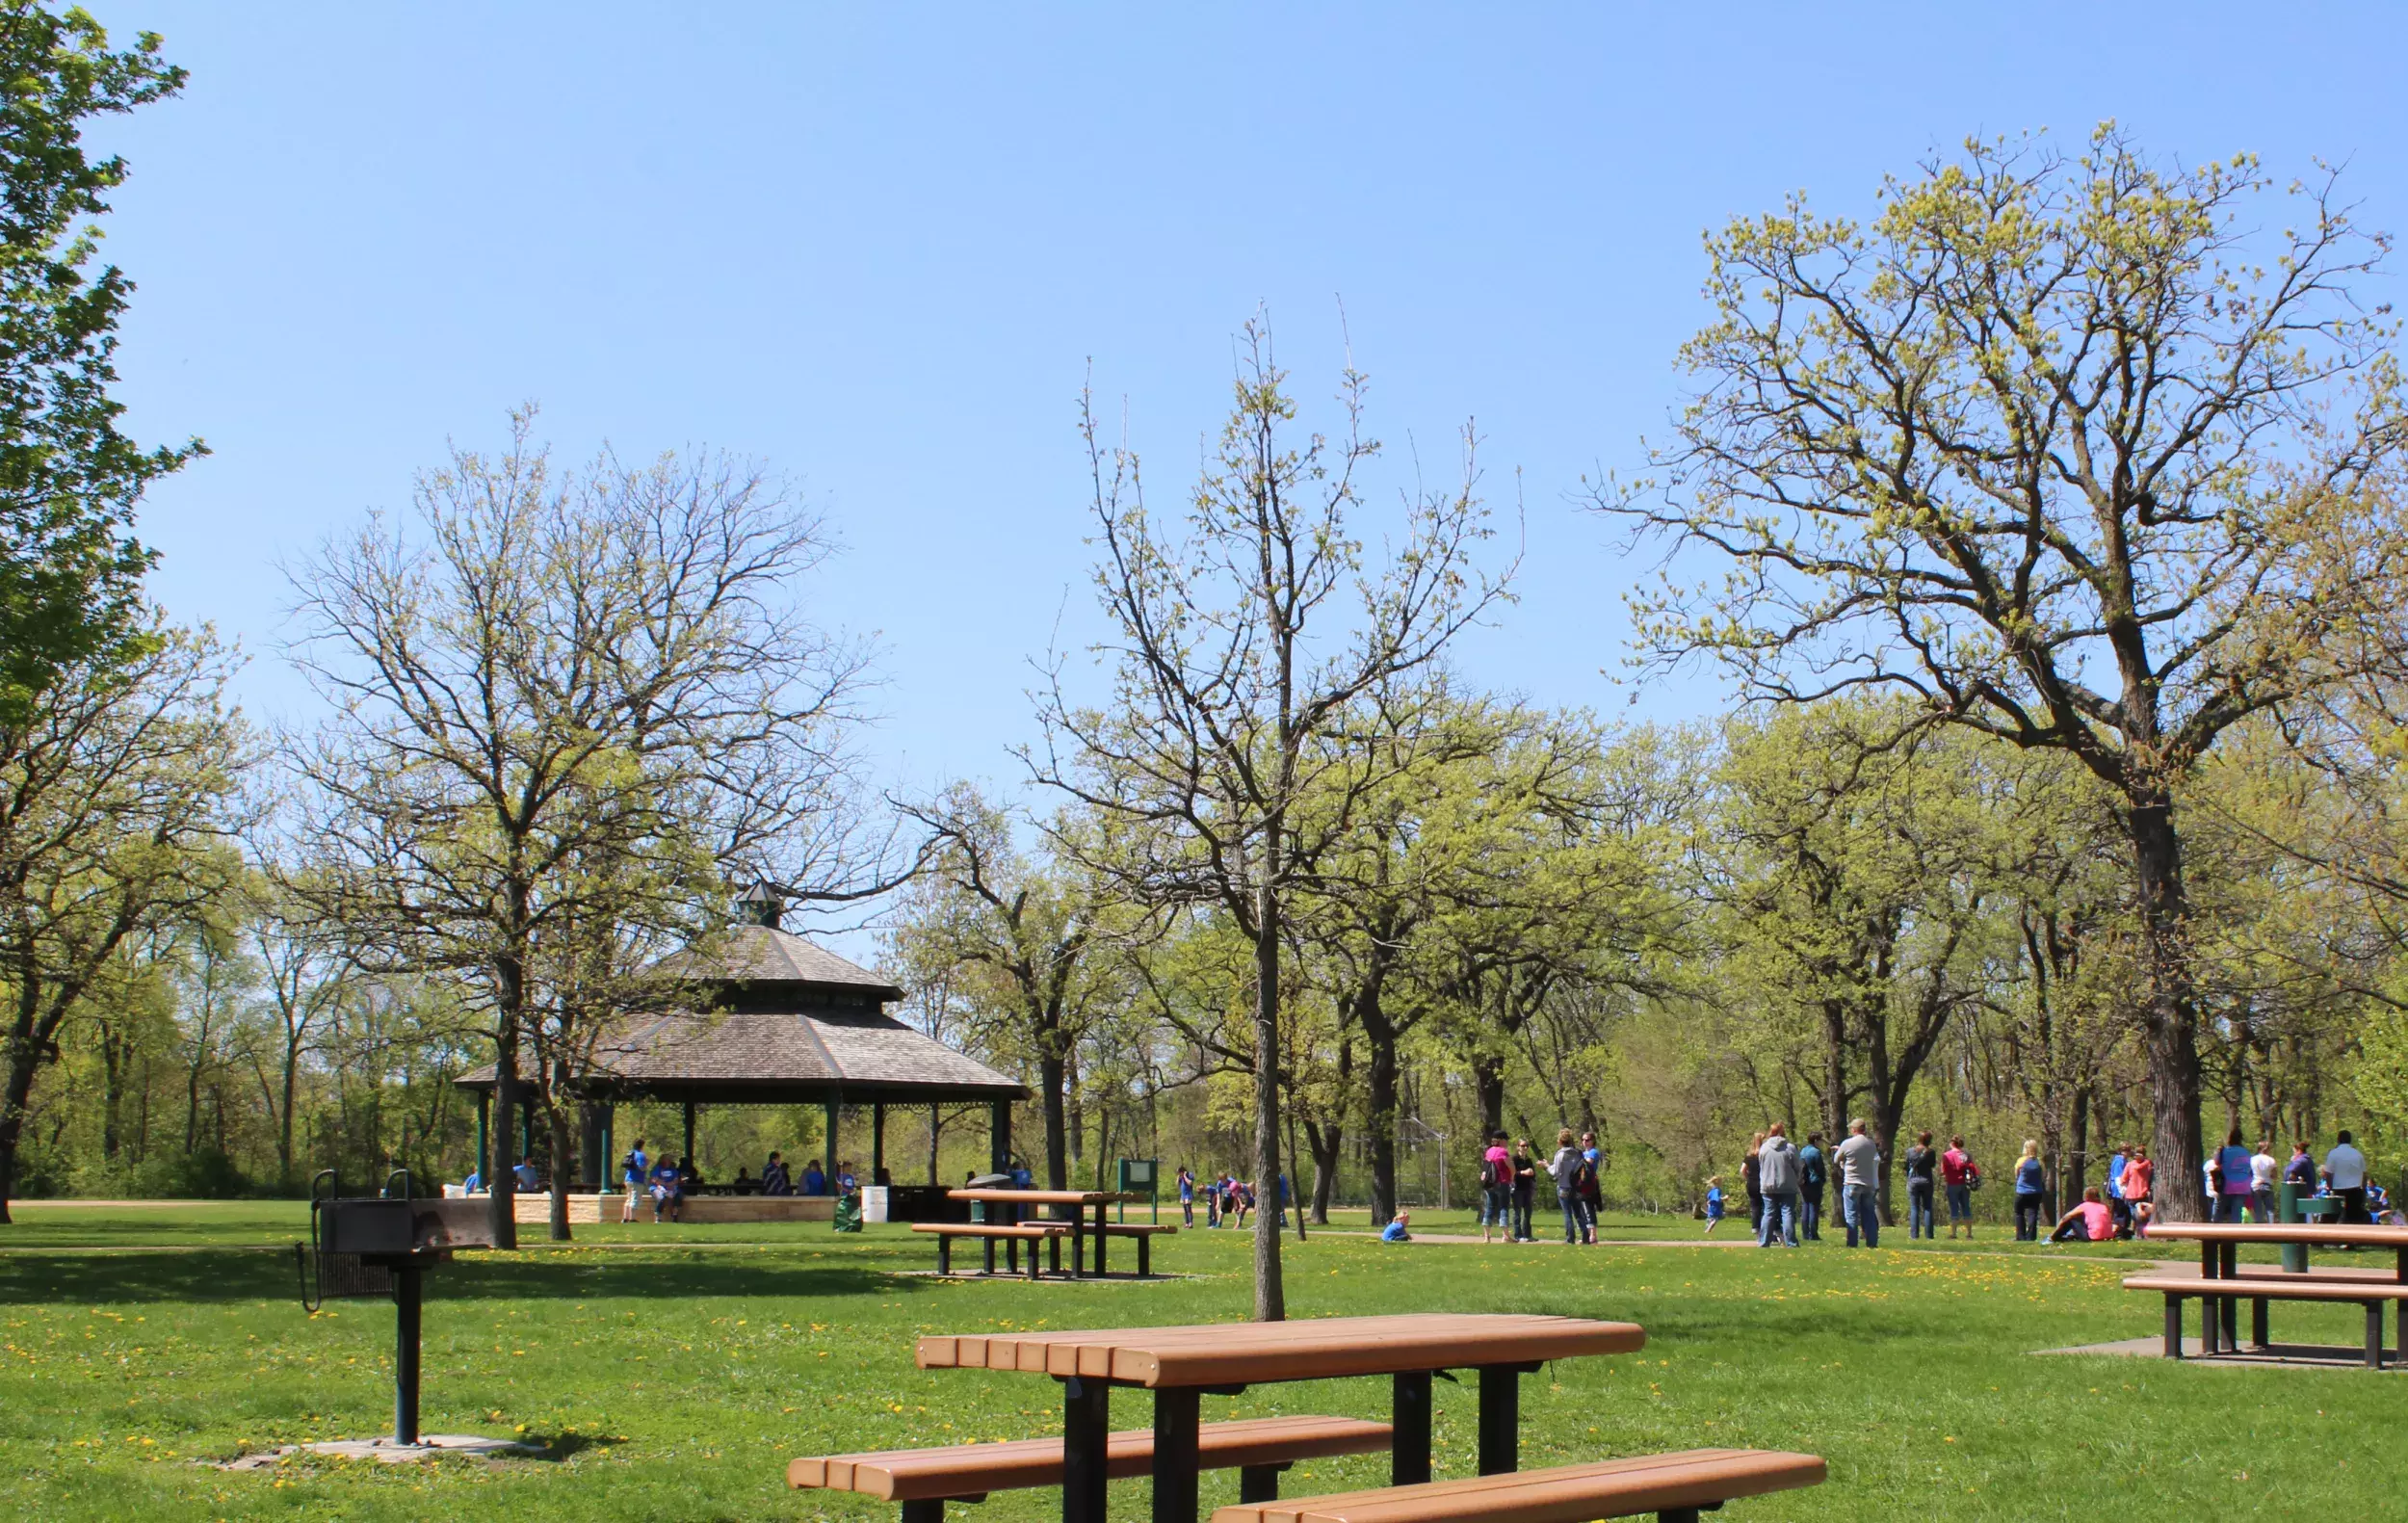 Como Regional Park picnic shelter and picnic tables in the early spring